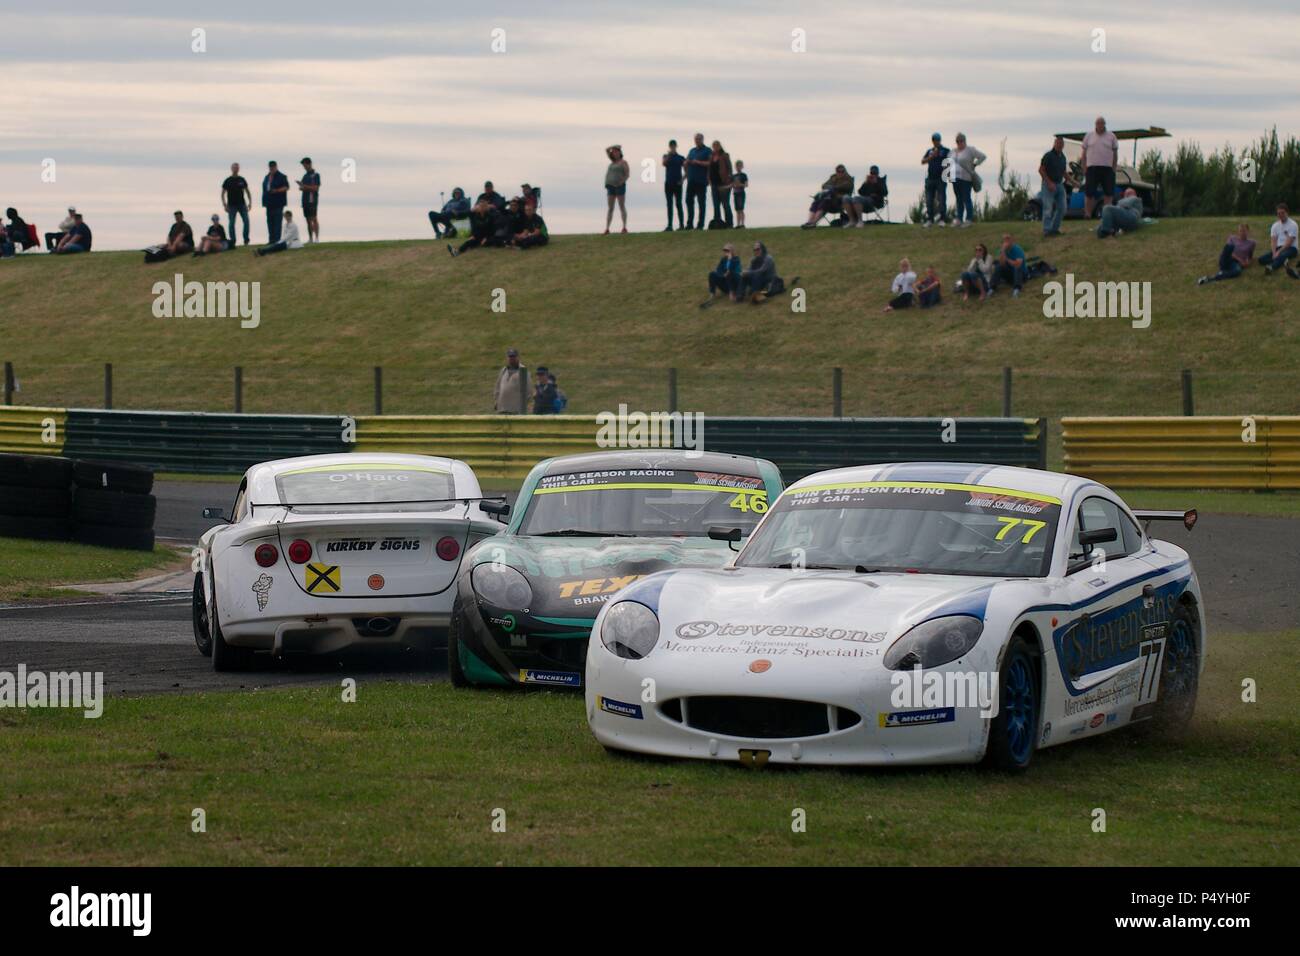 Dalton on Tees, England, 23 June 2018. Rookies Jamie Osborne, number 46, of WDE and Conner Garlick, number 77, a privateer driving on the grass to avoid a spinning car driven by rookie Ben O’Hare in Round 11 of the Ginetta Junior Championship at Croft. Credit: Colin Edwards/Alamy Live News. Stock Photo